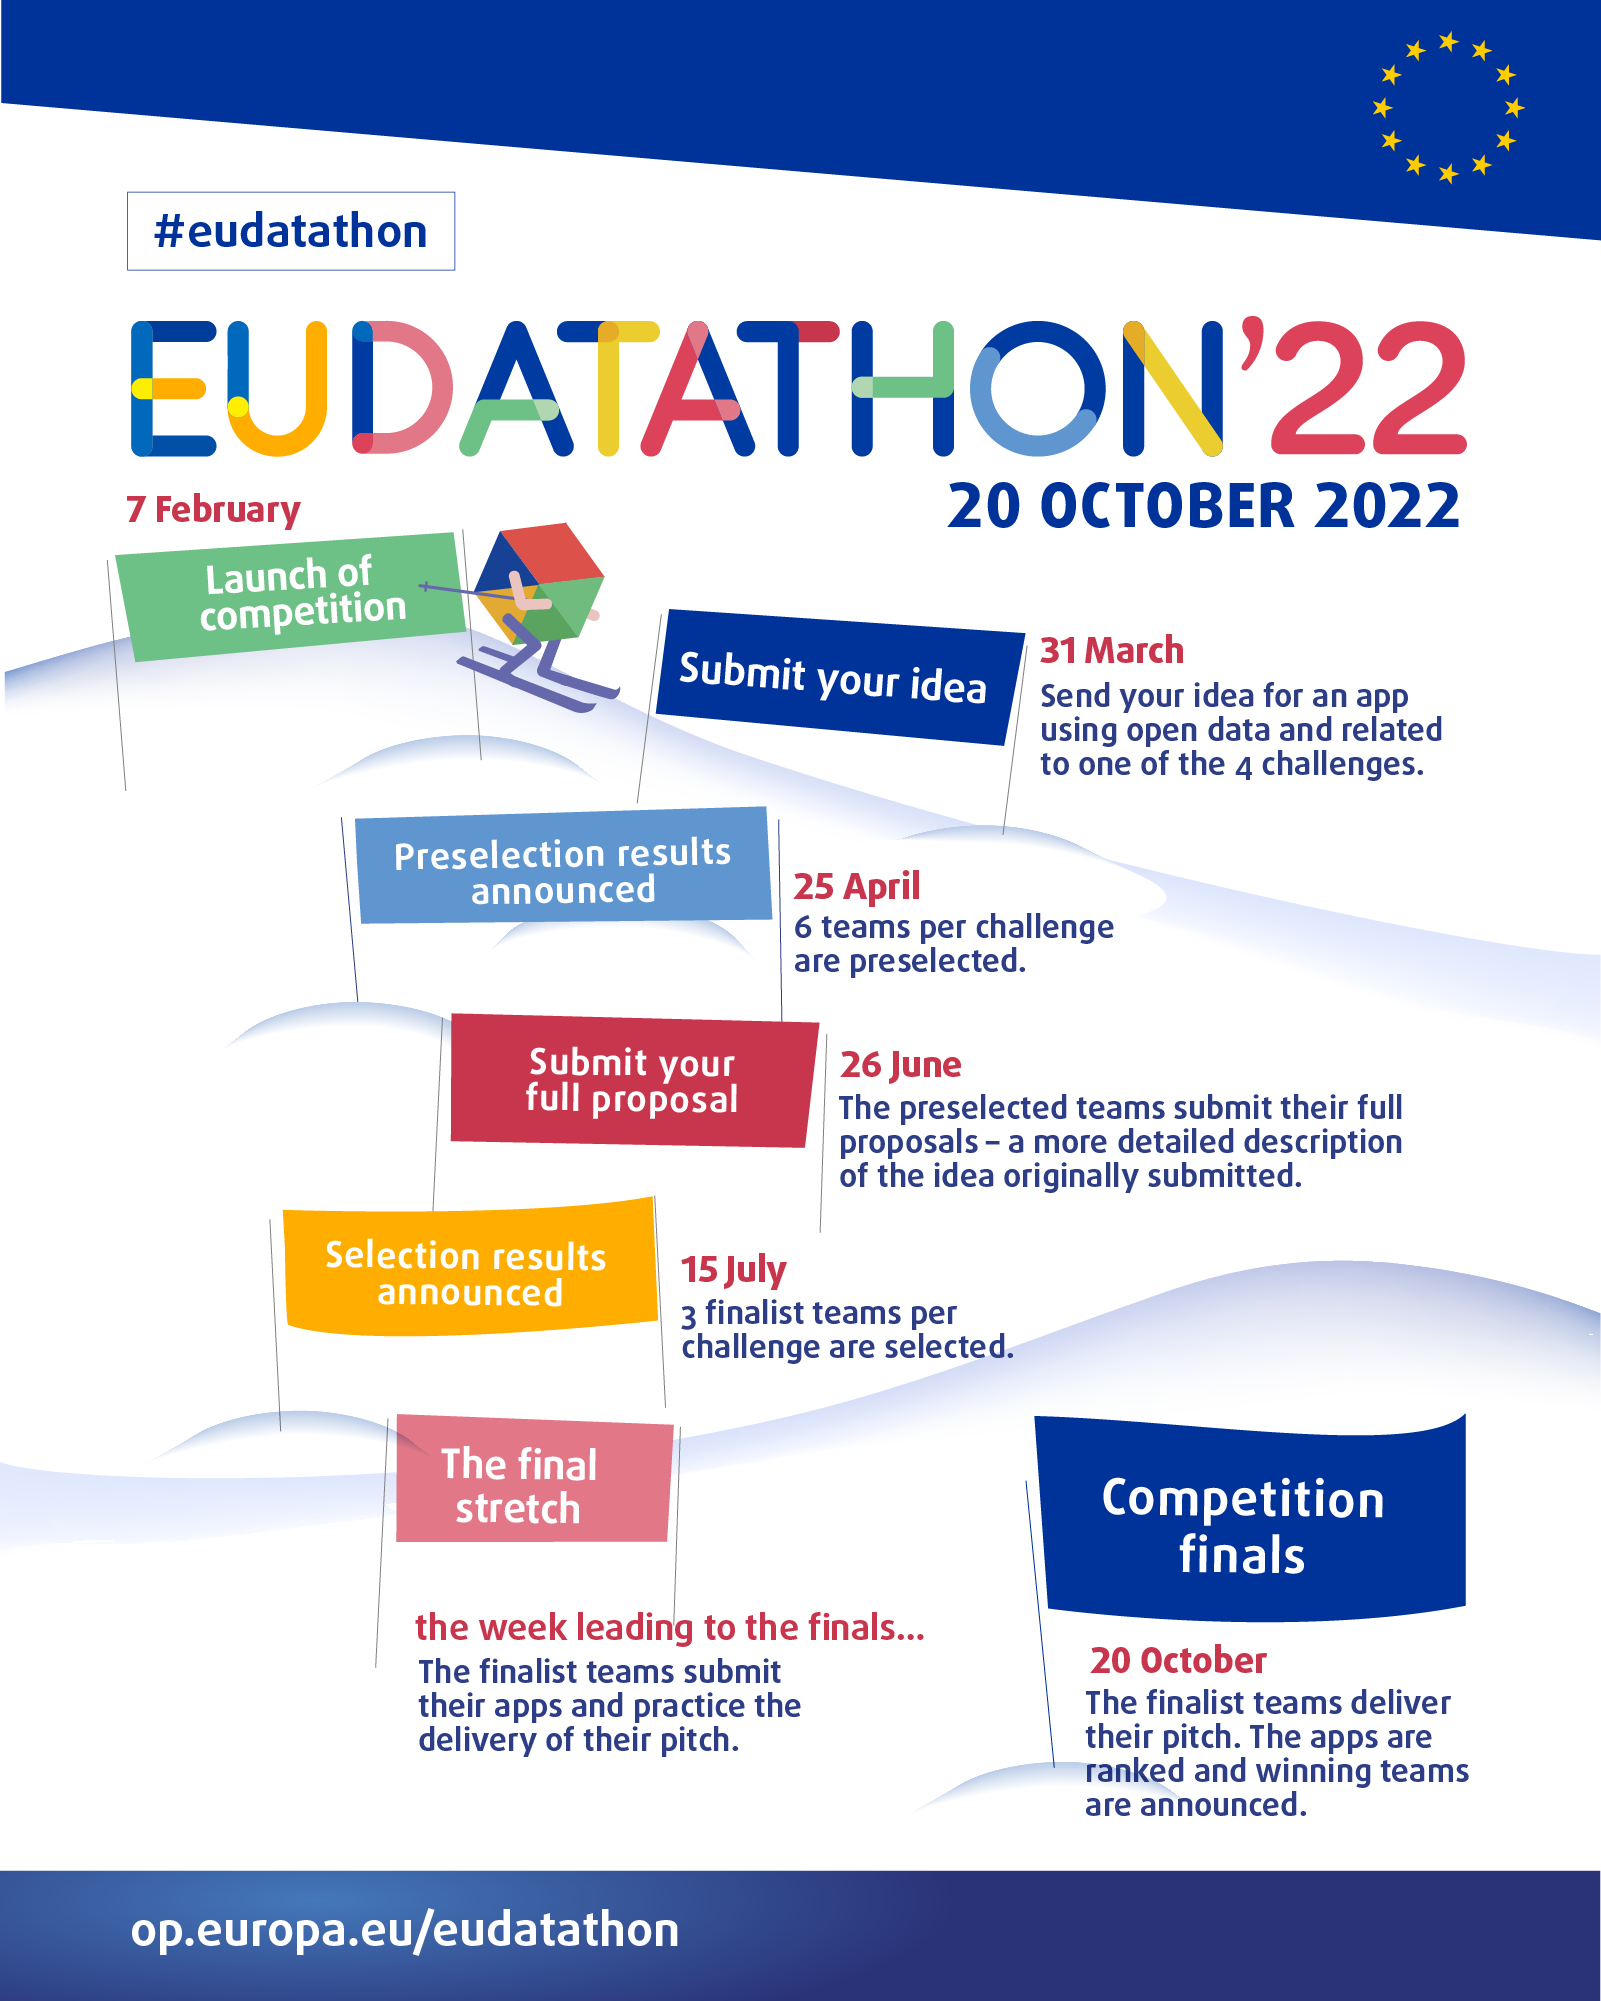 EU Datathon 2022 - image visualising the steps of the competition